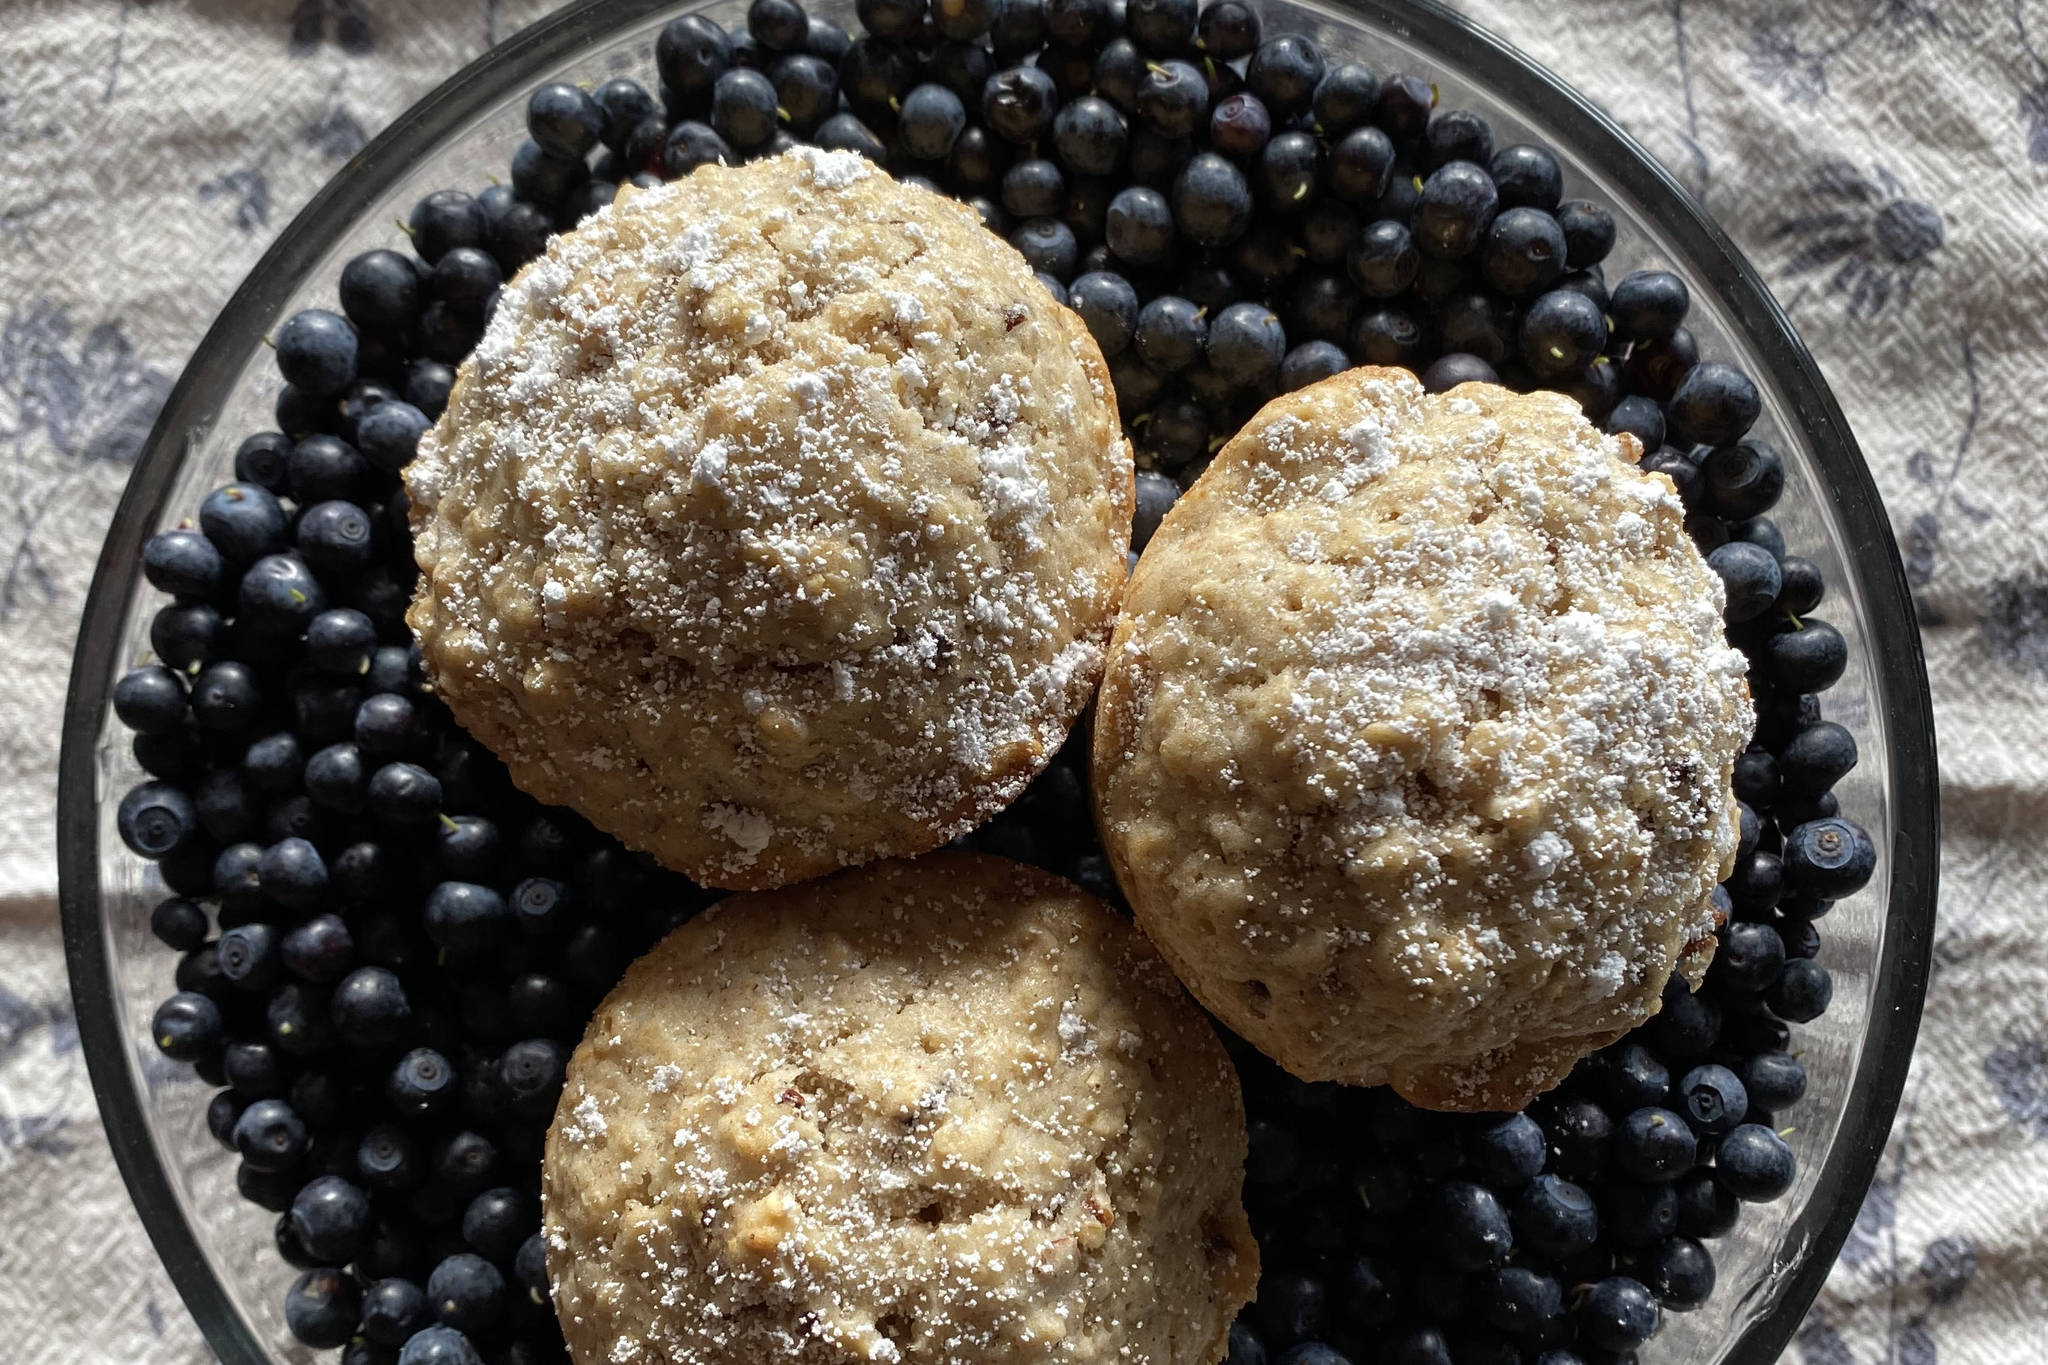 This base oatmeal muffin mix offers endless variations and can be paired with fresh fruits and berries. (Photo by Tressa Dale/Peninsula Clarion)